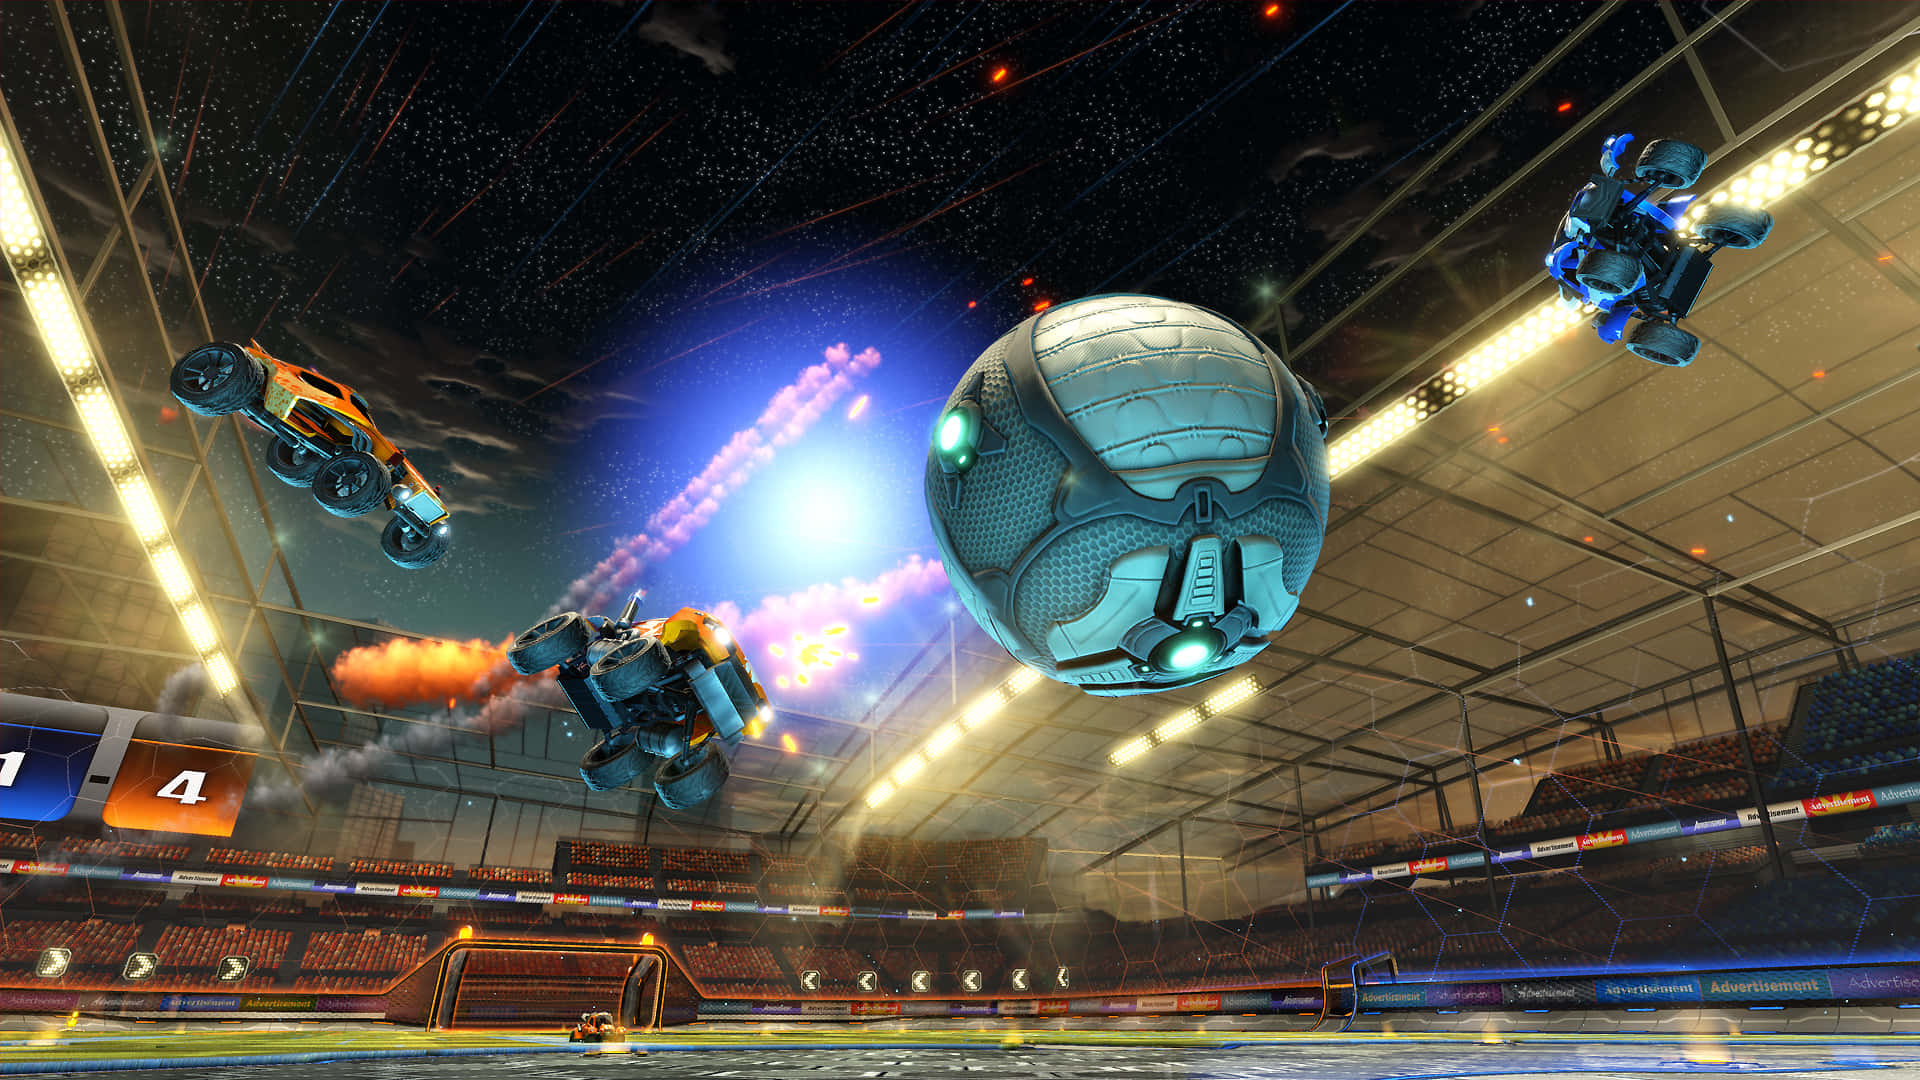 Explosive Gameplay On The Rocket League Field Background